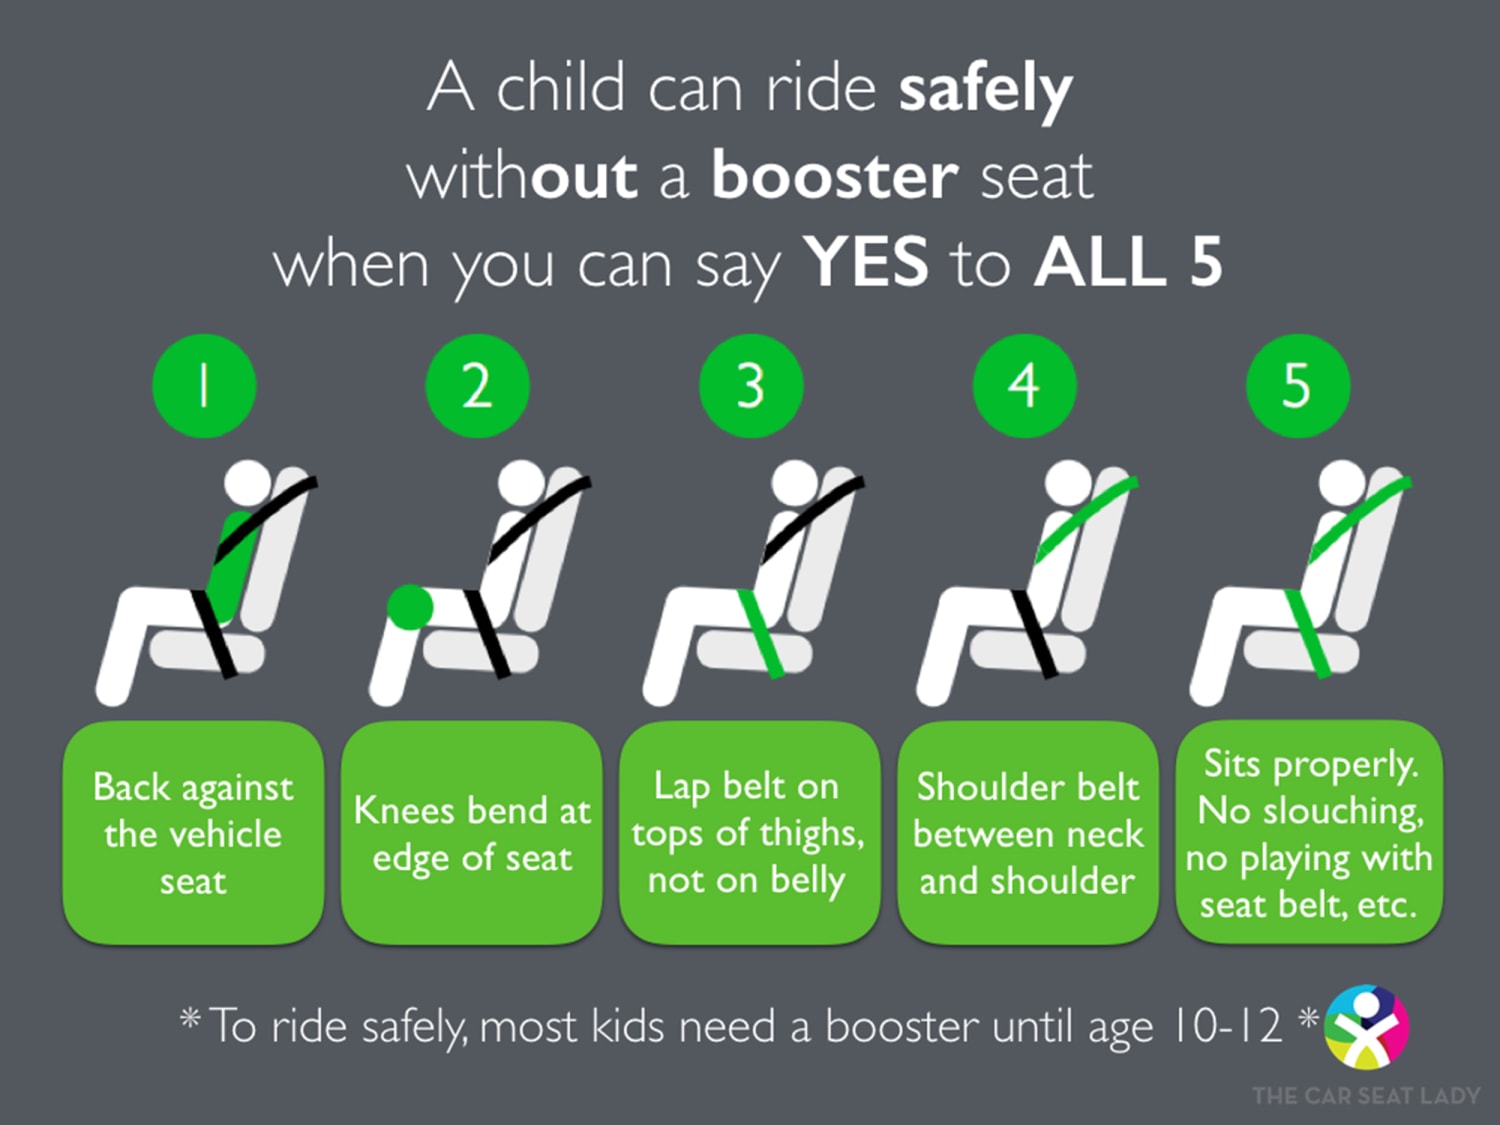 FYI: You cannot use a case of beer as a booster seat